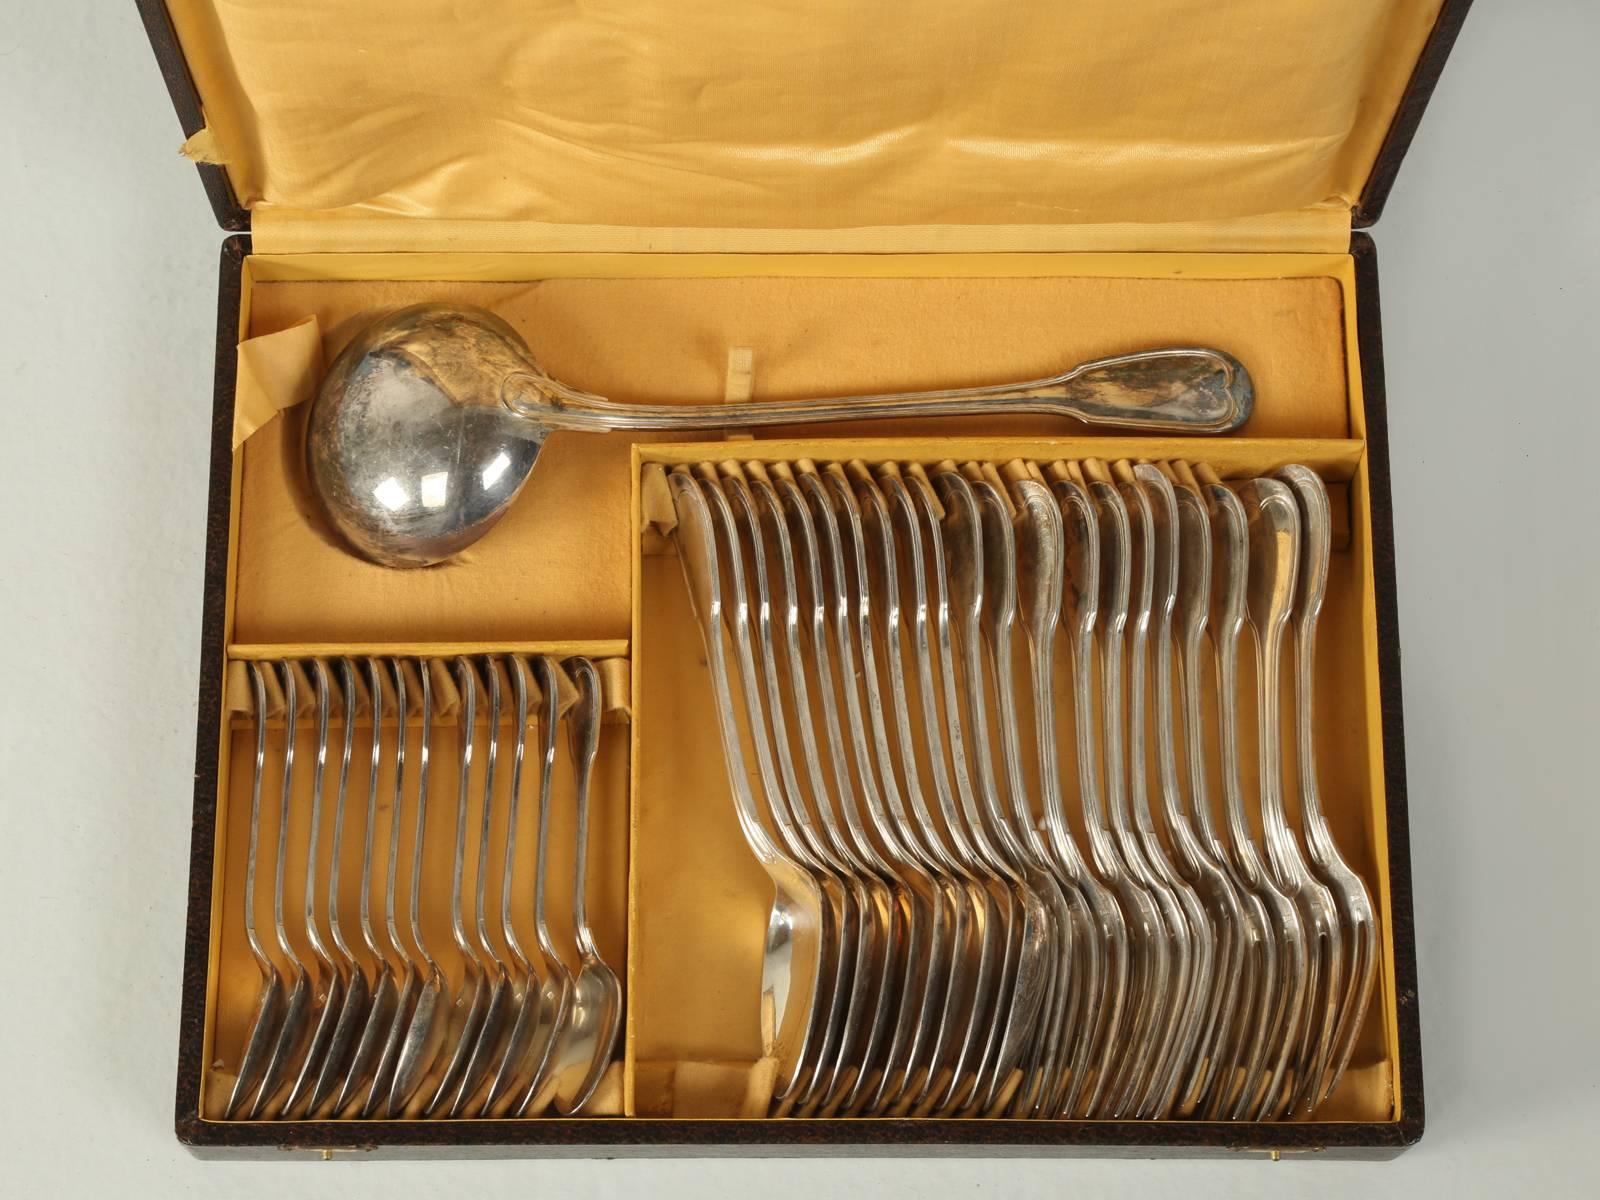 Antique French silver hallmarked, set of (34) pieces, including spoons, forks and a ladle in their original fitted box; possibly a stew set.
There are: (12) small spoons, (10) very large spoons, (11) large forks and one ladle.